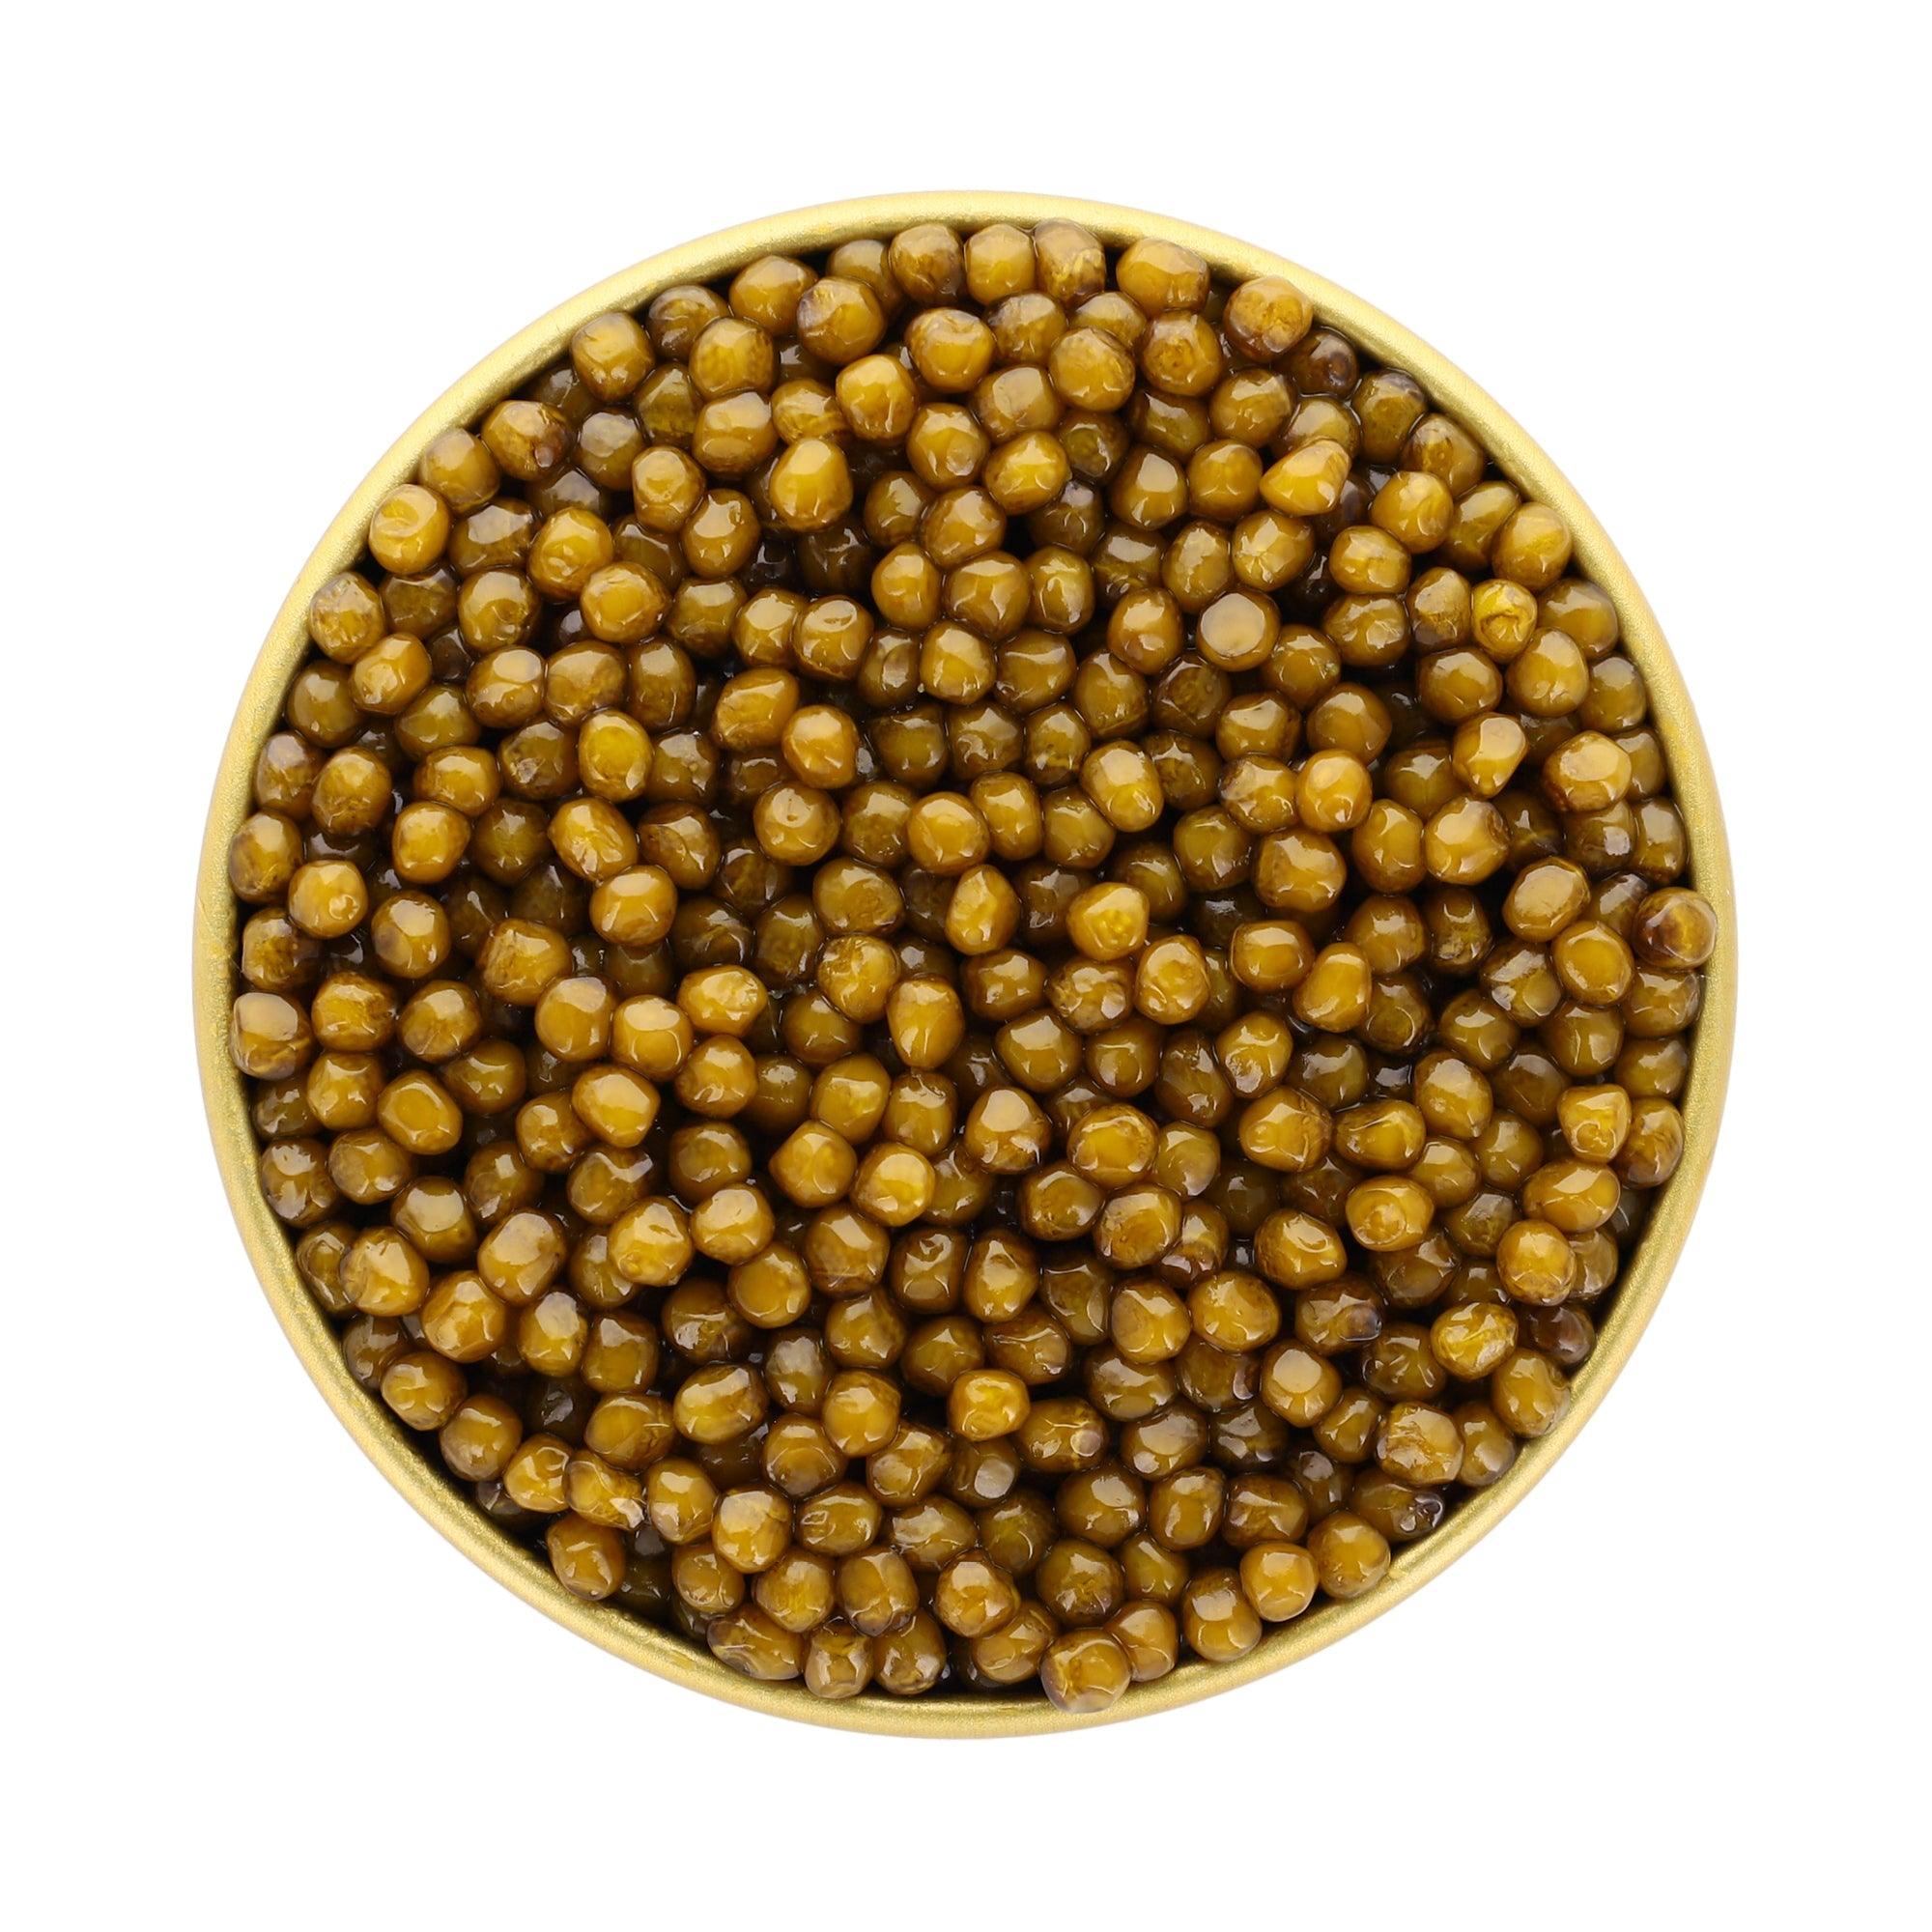 large caviar with mild nutty taste, intense brown to gold color, limited availability